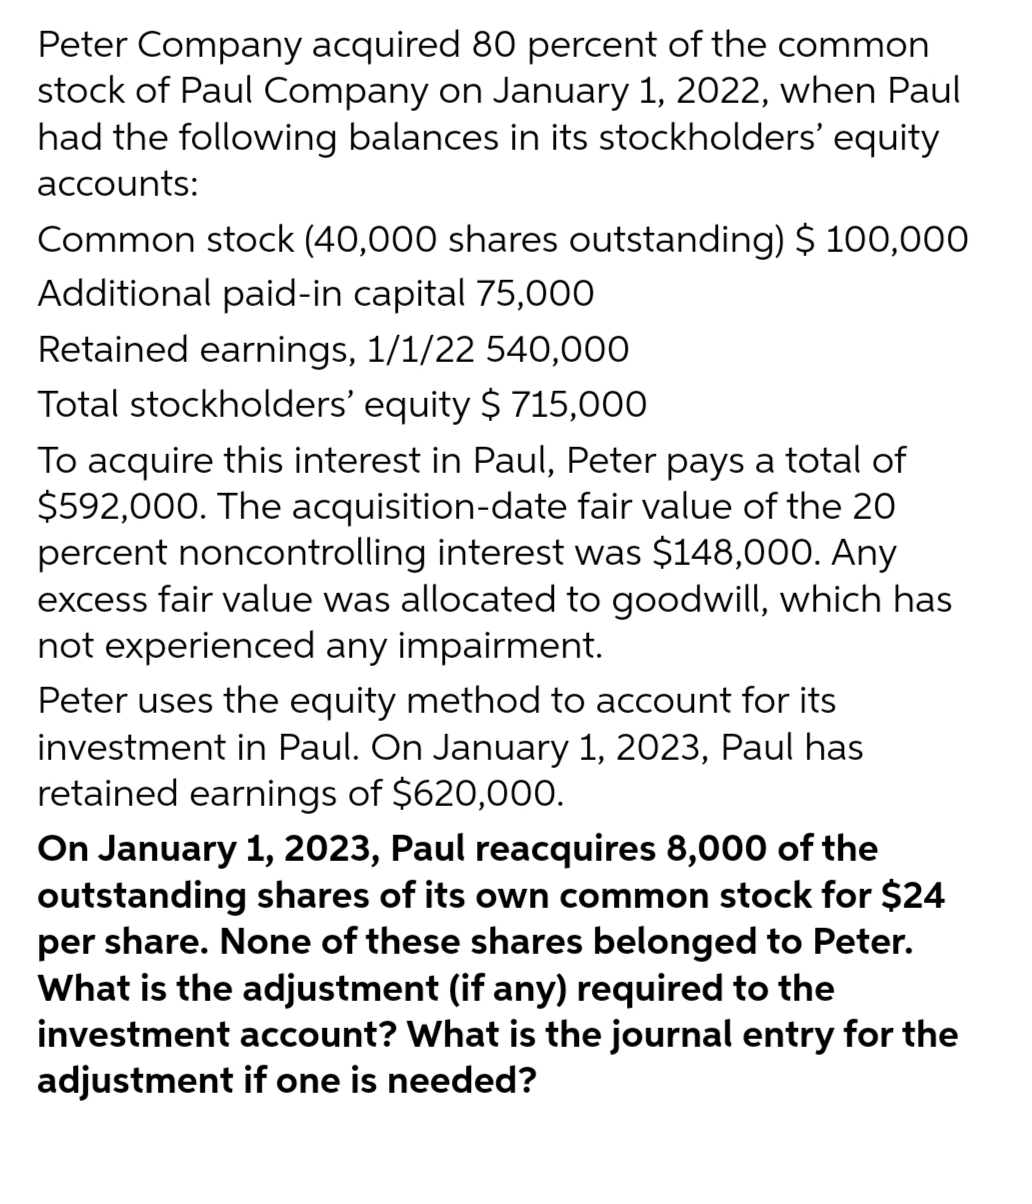 Peter Company acquired 80 percent of the common
stock of Paul Company on January 1, 2022, when Paul
had the following balances in its stockholders' equity
accounts:
Common stock (40,000 shares outstanding) $ 100,000
Additional paid-in capital 75,000
Retained earnings, 1/1/22 540,000
Total stockholders' equity $715,000
To acquire this interest in Paul, Peter pays a total of
$592,000. The acquisition-date fair value of the 20
percent noncontrolling interest was $148,000. Any
excess fair value was allocated to goodwill, which has
not experienced any impairment.
Peter uses the equity method to account for its
investment in Paul. On January 1, 2023, Paul has
retained earnings of $620,000.
On January 1, 2023, Paul reacquires 8,000 of the
outstanding shares of its own common stock for $24
per share. None of these shares belonged to Peter.
What is the adjustment (if any) required to the
investment account? What is the journal entry for the
adjustment if one is needed?